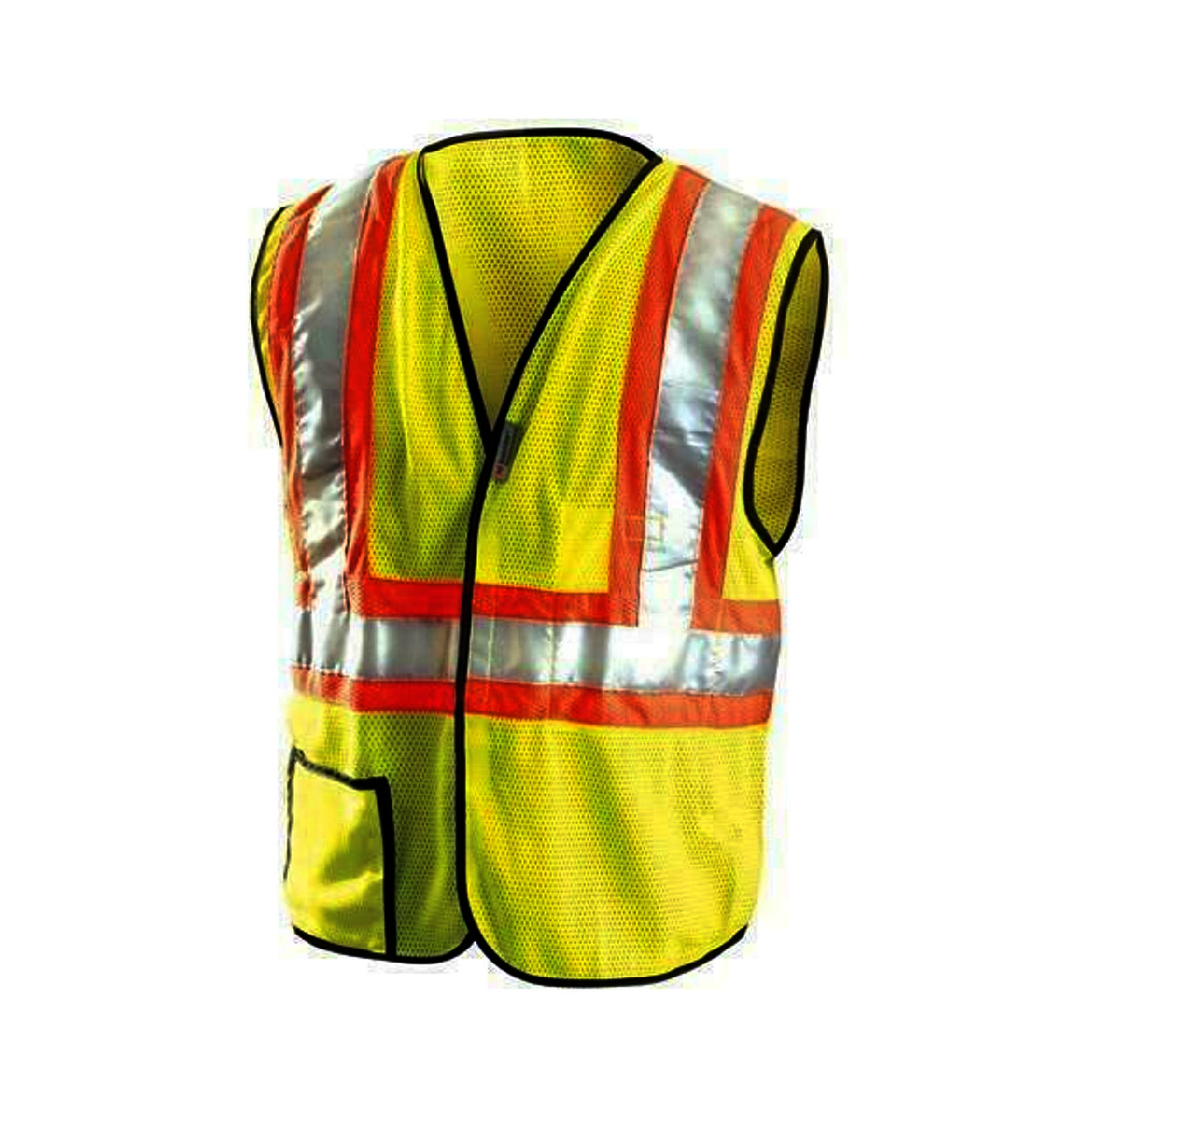 3M™ ANSI Class 2 Two-Tone Safety Vest, Large Yellow